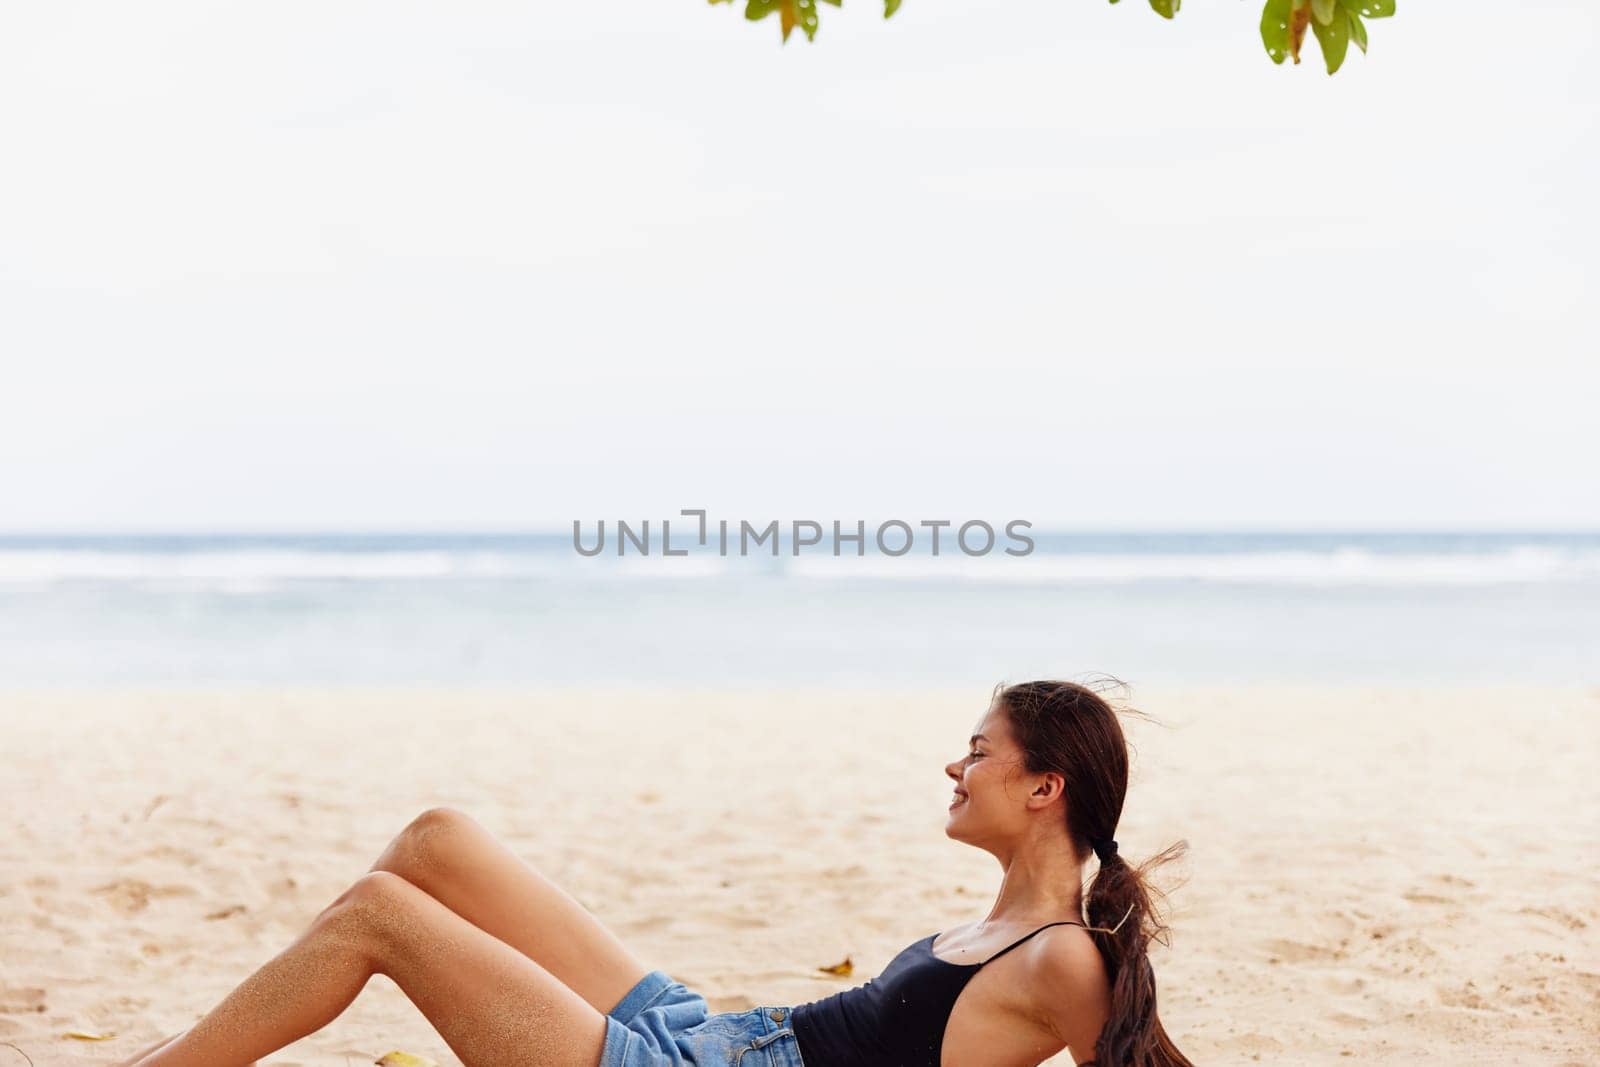 woman fashion young person body sun beach relax attractive beauty nature sea vacation smile freedom lifestyle sitting holiday sand travel carefree